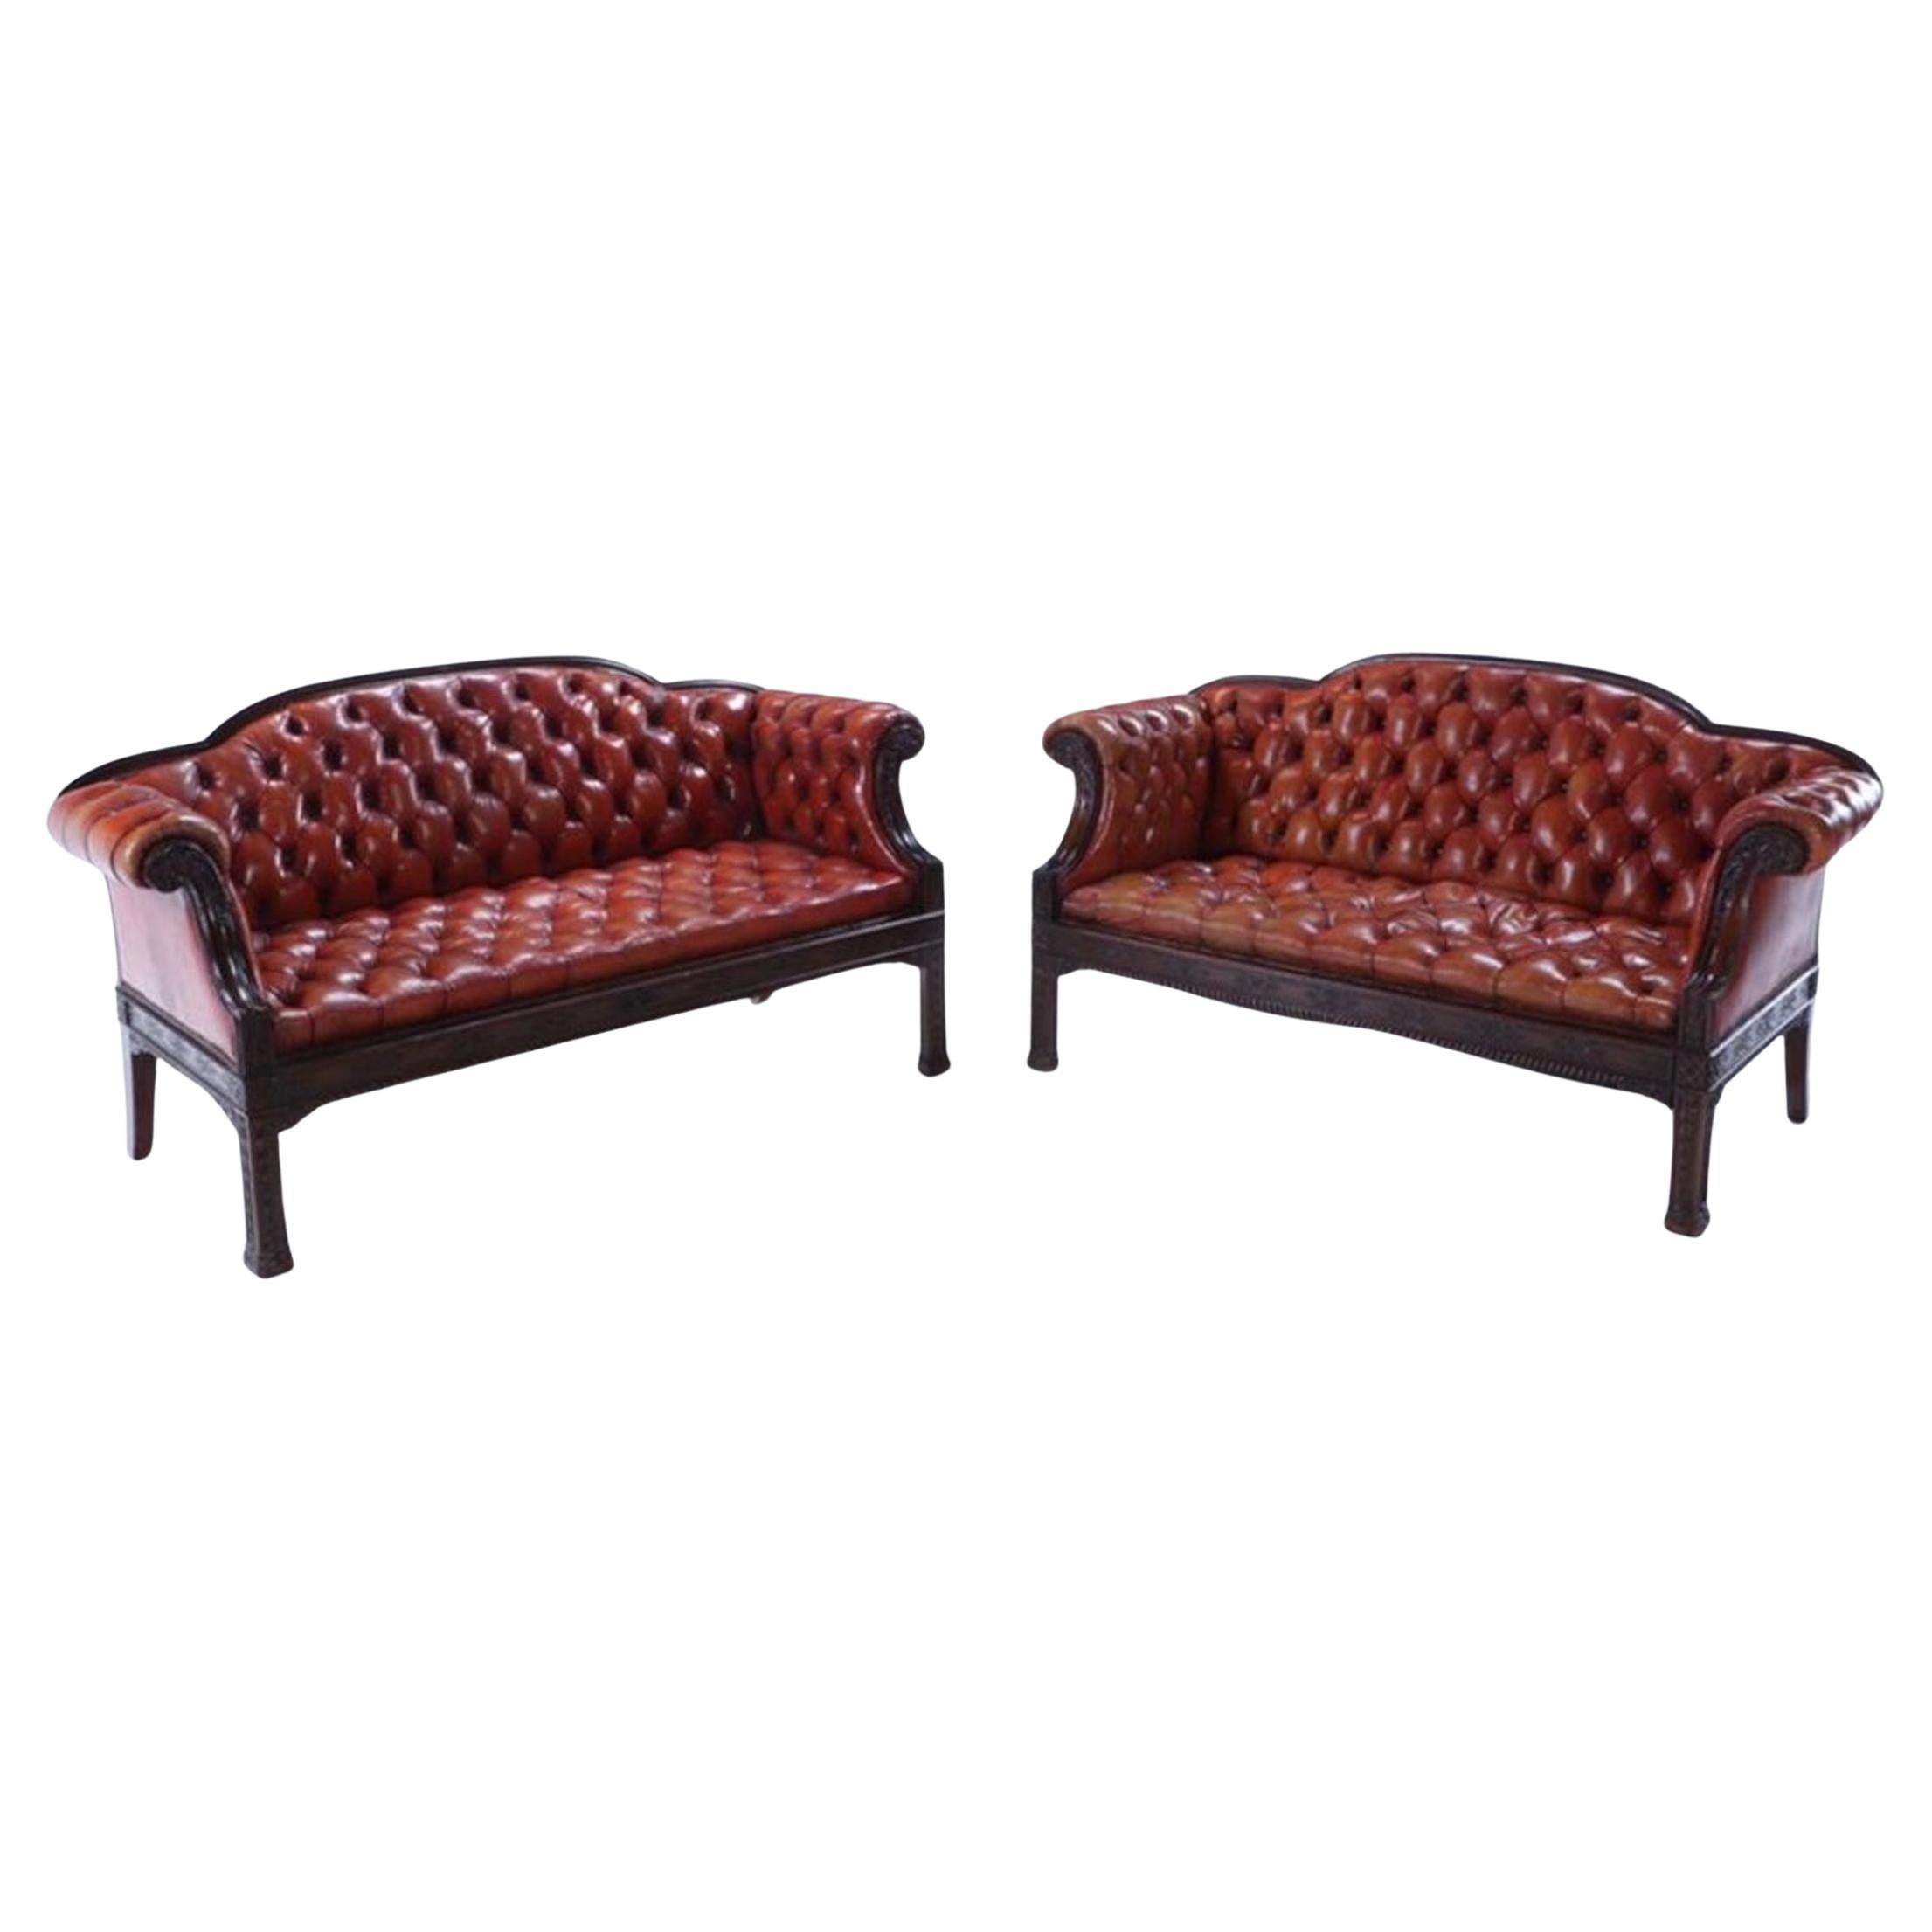 Pair of Scottish Georgian Style Carved Mahogany Leather Button Back Sofas